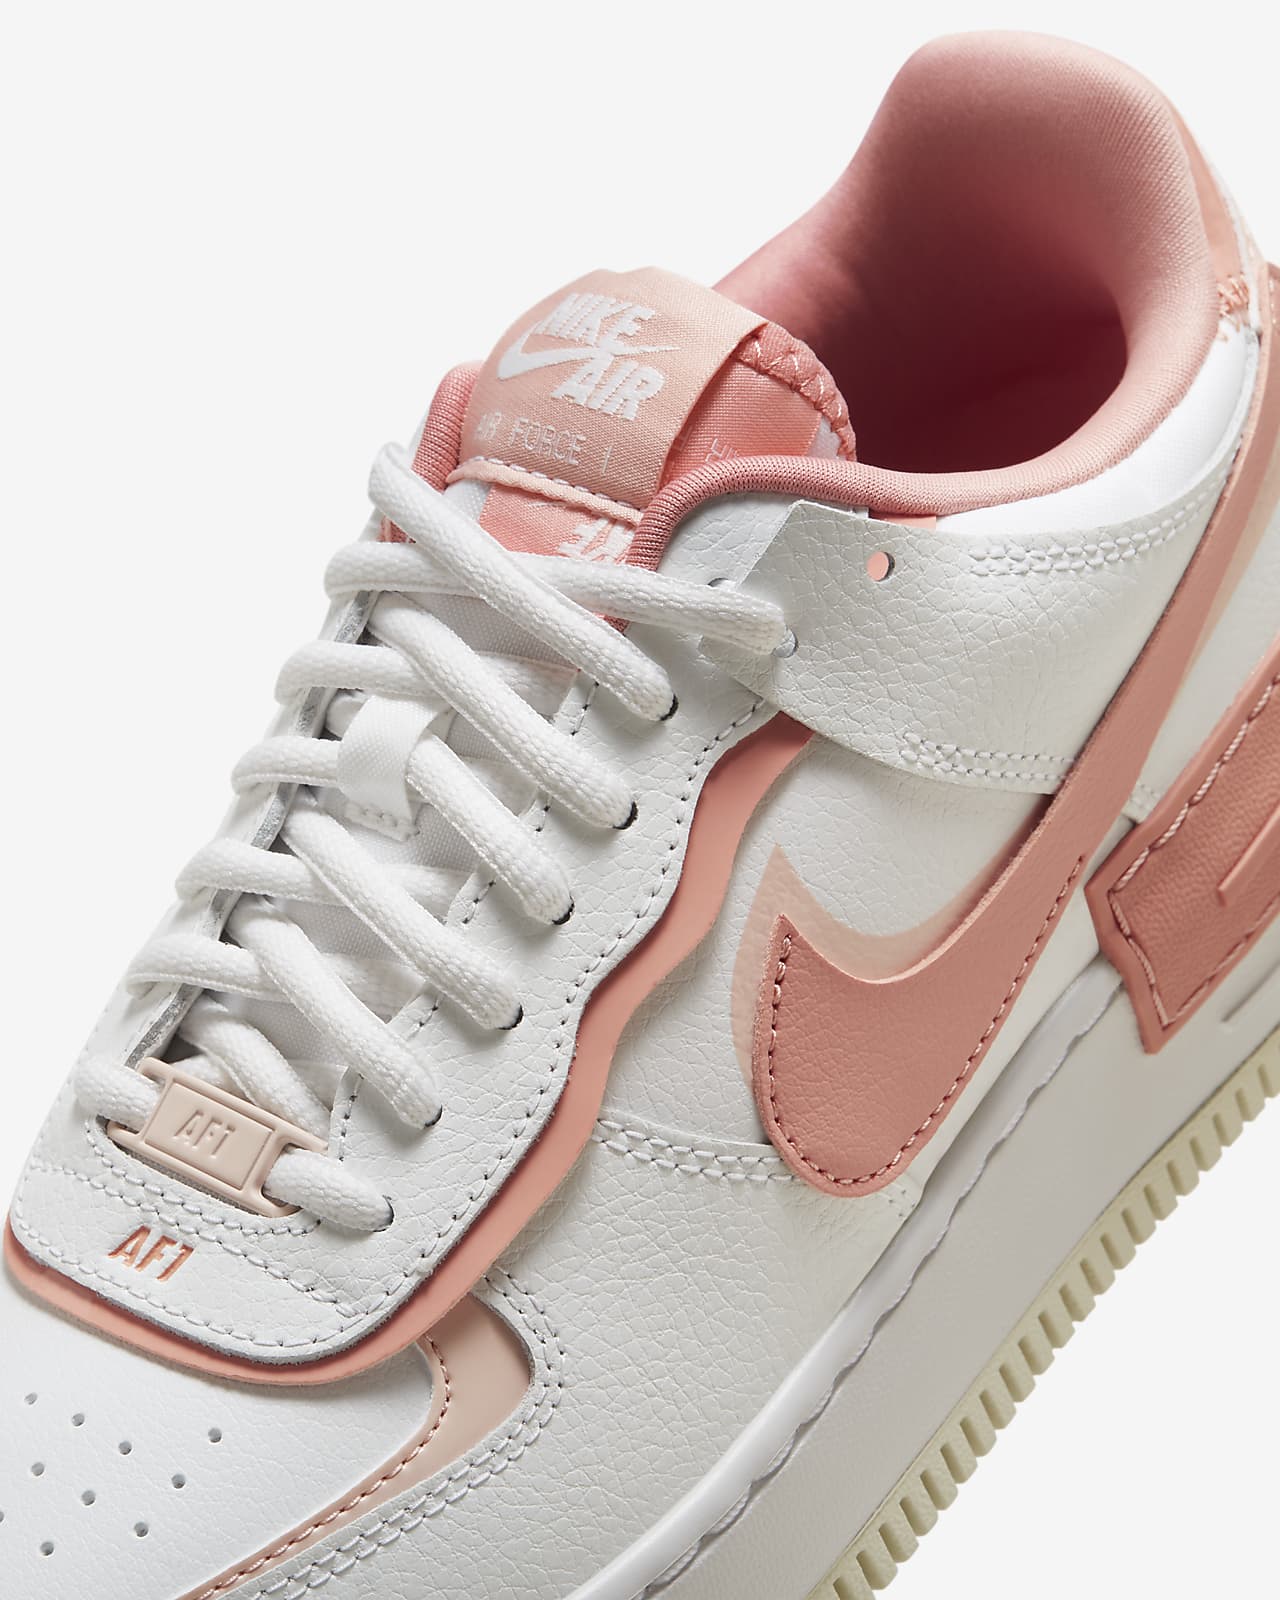 nike air force 1 womens pink and white